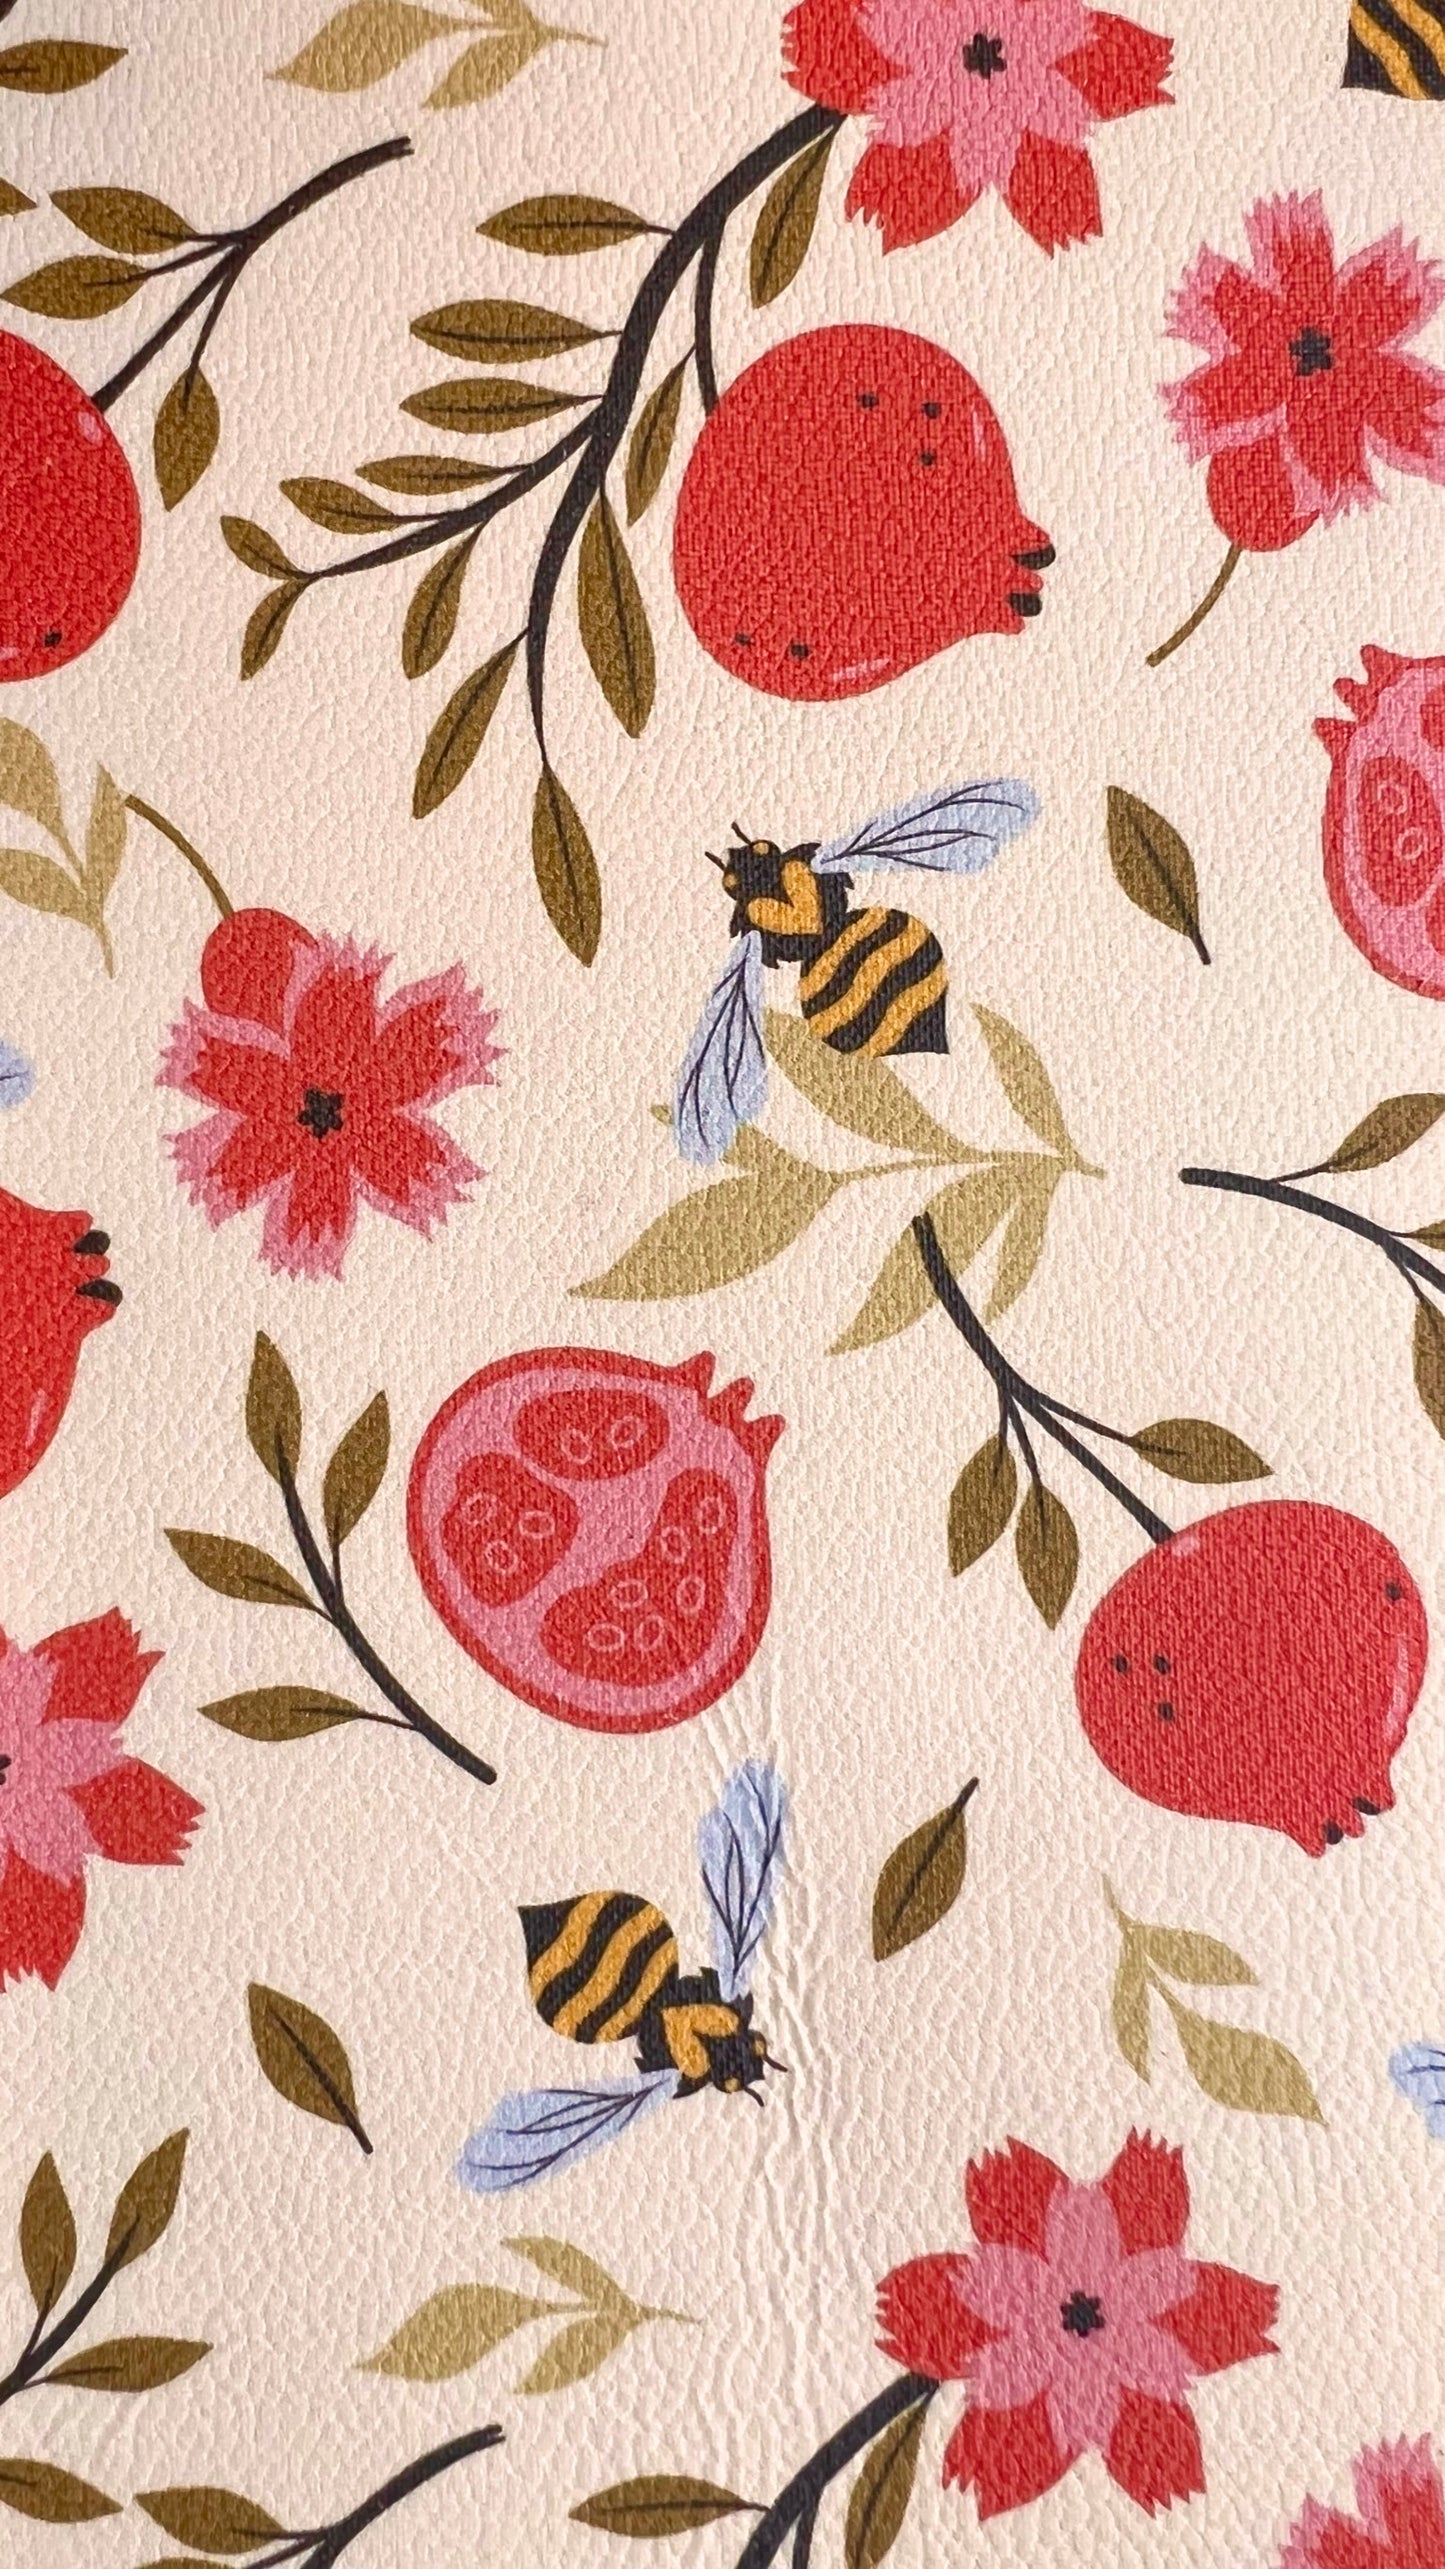 Fruit and Bee Lamb Leather Crafting Sheet 8 1/2" x 11"